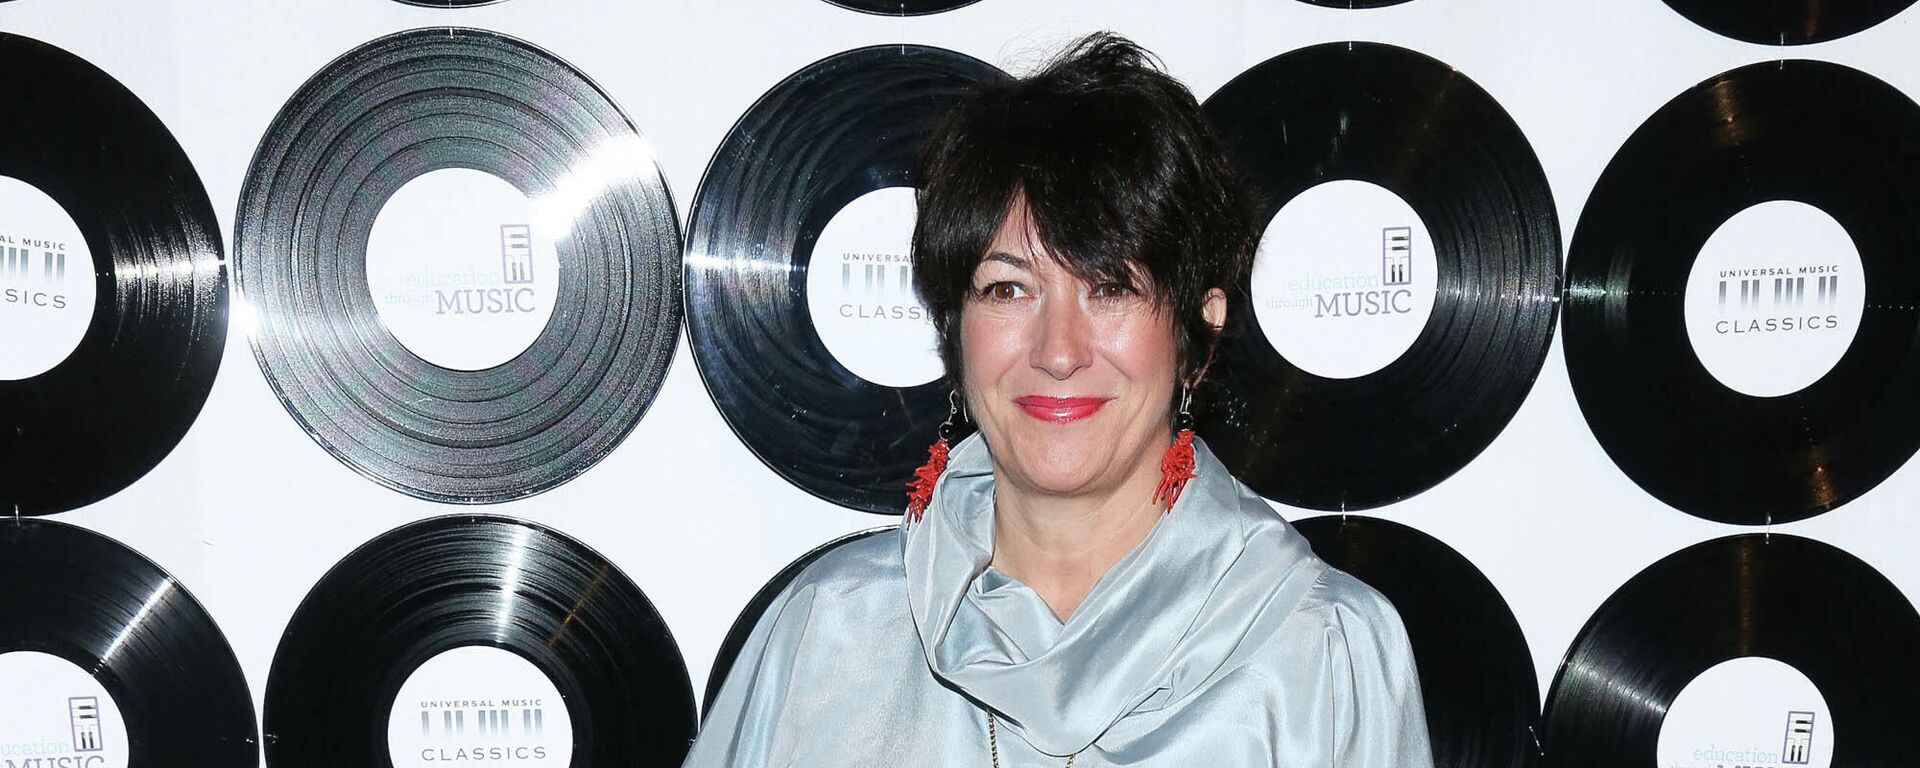 Ghislaine Maxwell attends the 2014 ETM (EDUCATION THROUGH MUSIC) Children's Benefit Gala at Capitale on May 6, 2014 in New York City.   - Sputnik International, 1920, 23.11.2021